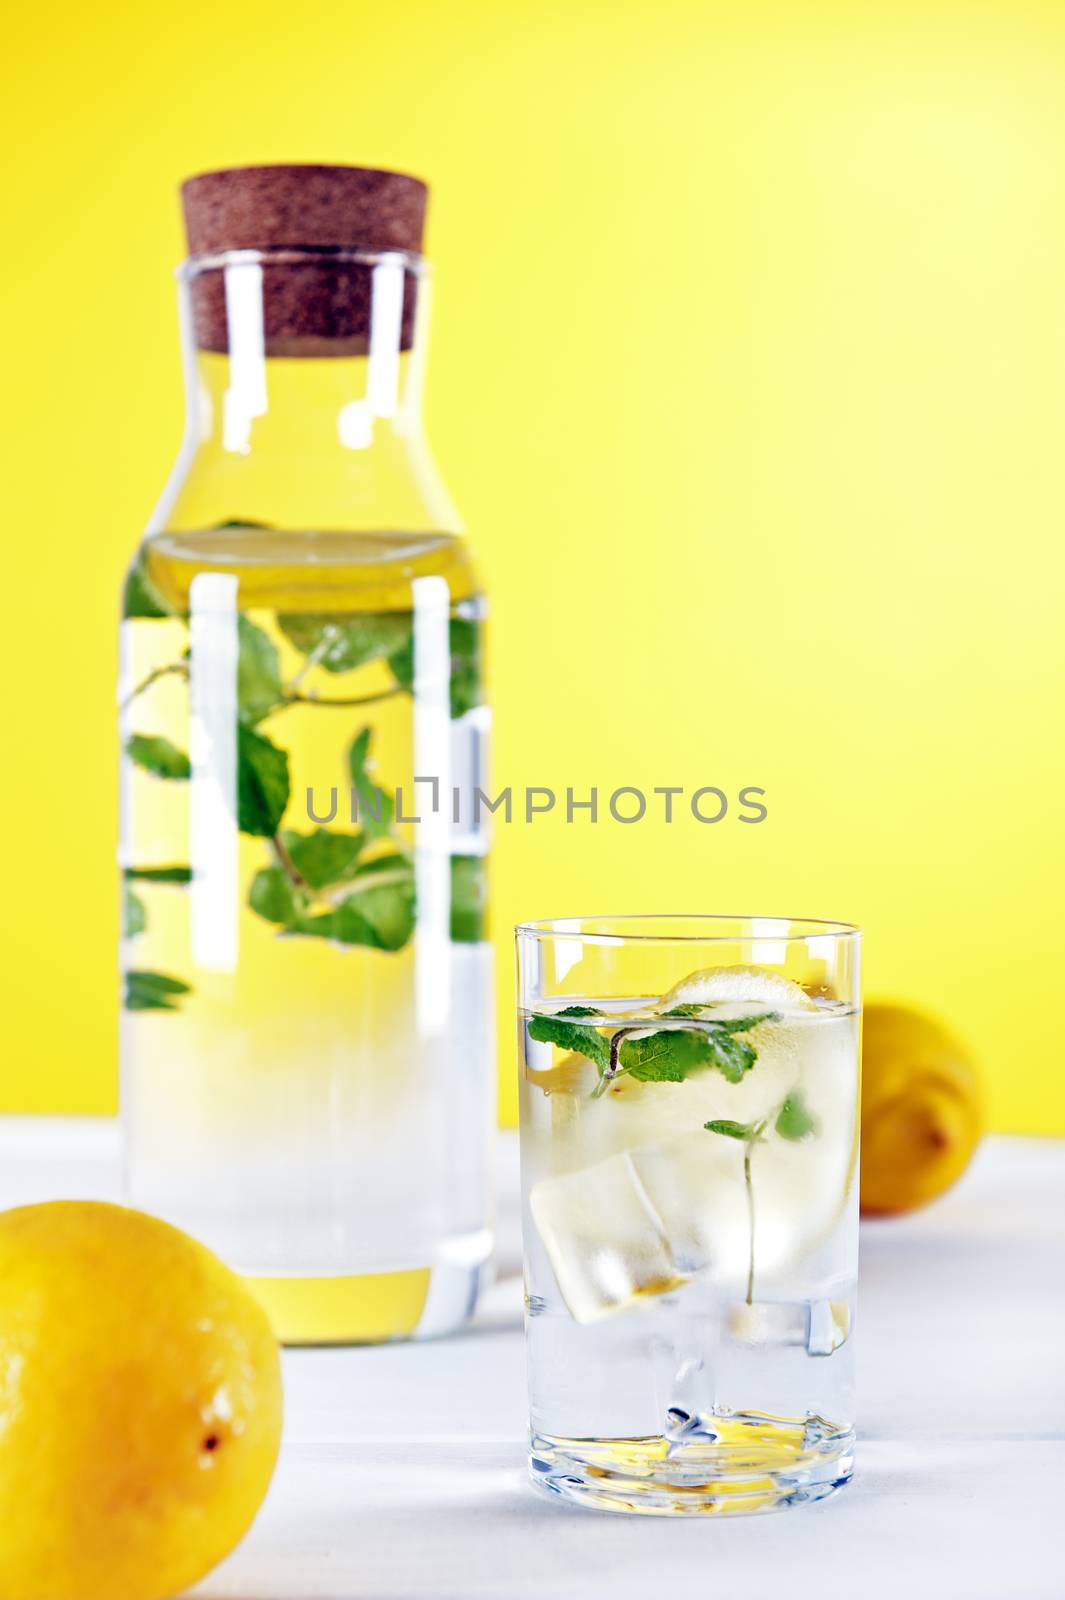 Cold water with lemon and mint on yellow background by Michalowski